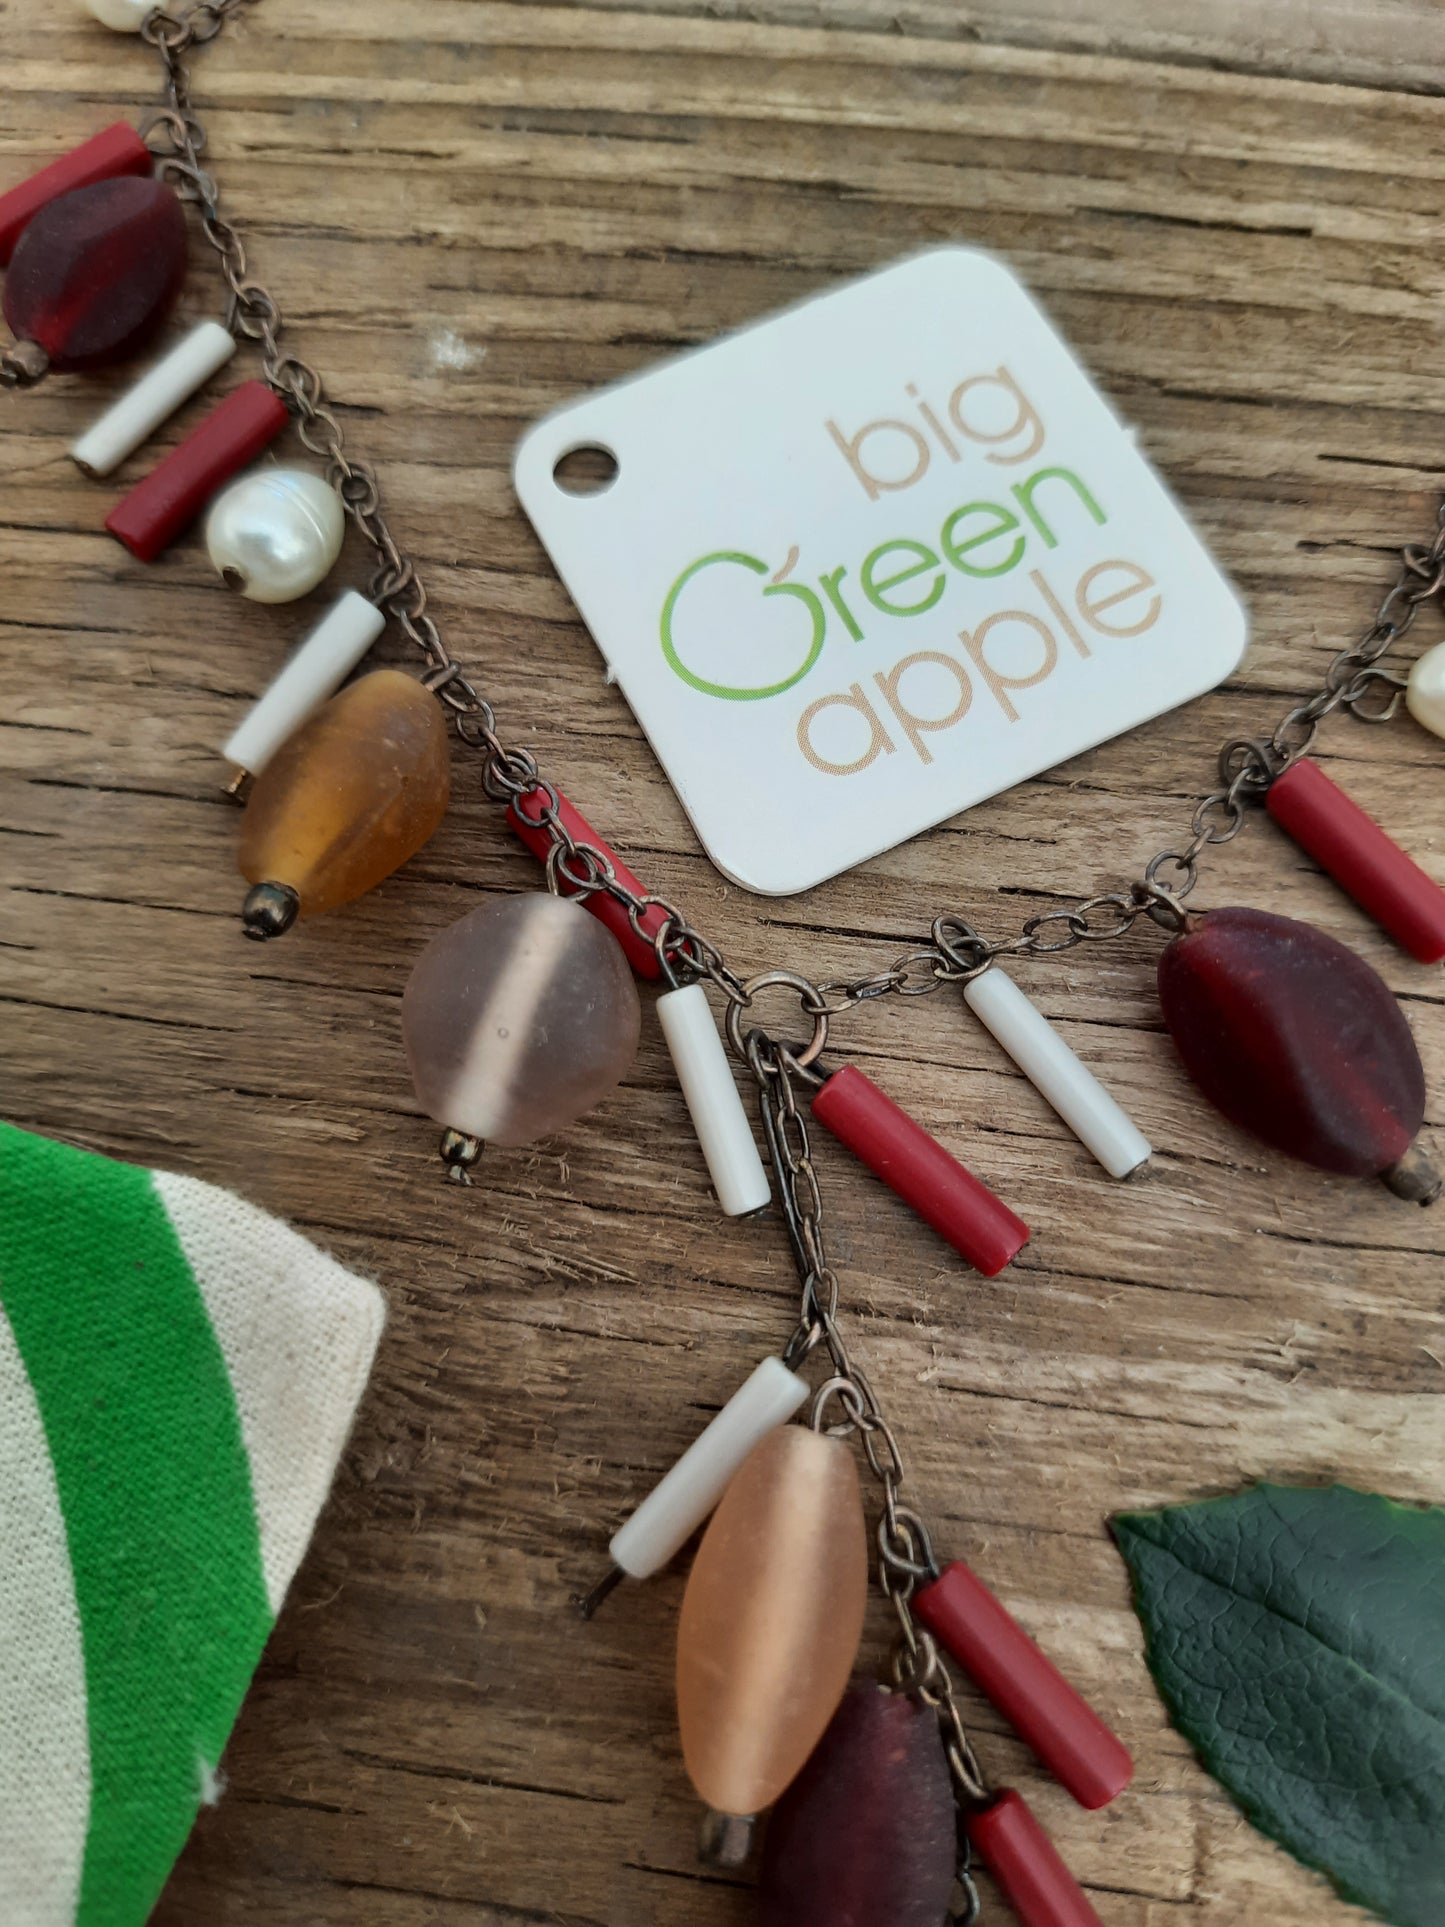 Necklaces, Sustainable Gift Ideas, Ethical Online Shopping, Fair Trade Products, Jewelry Fair Trade, Gift, Birthday Gifts For Her, BIG GREEN APPLE